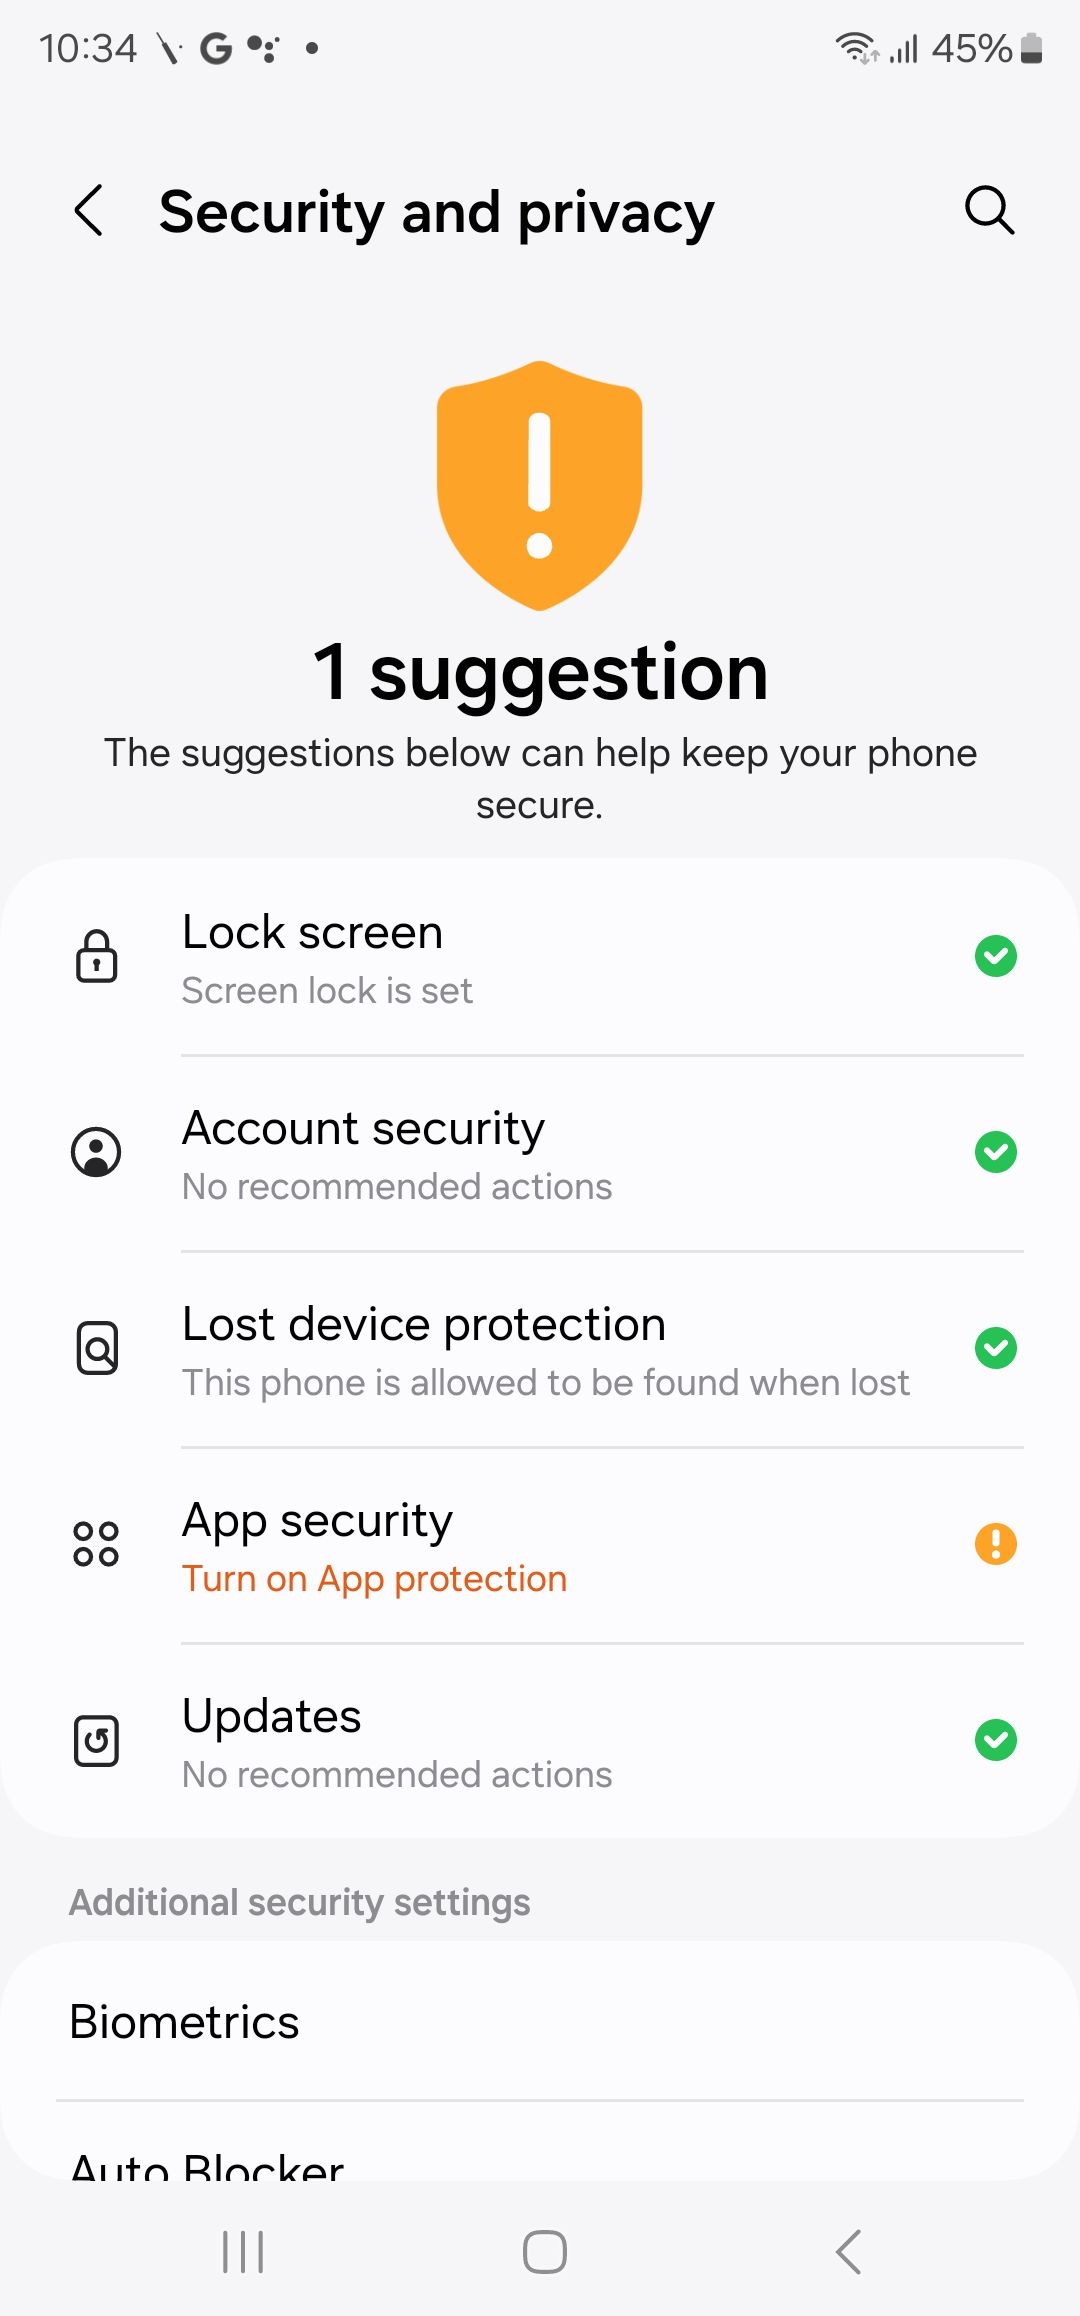 Security and privacy menu on Samsung phone